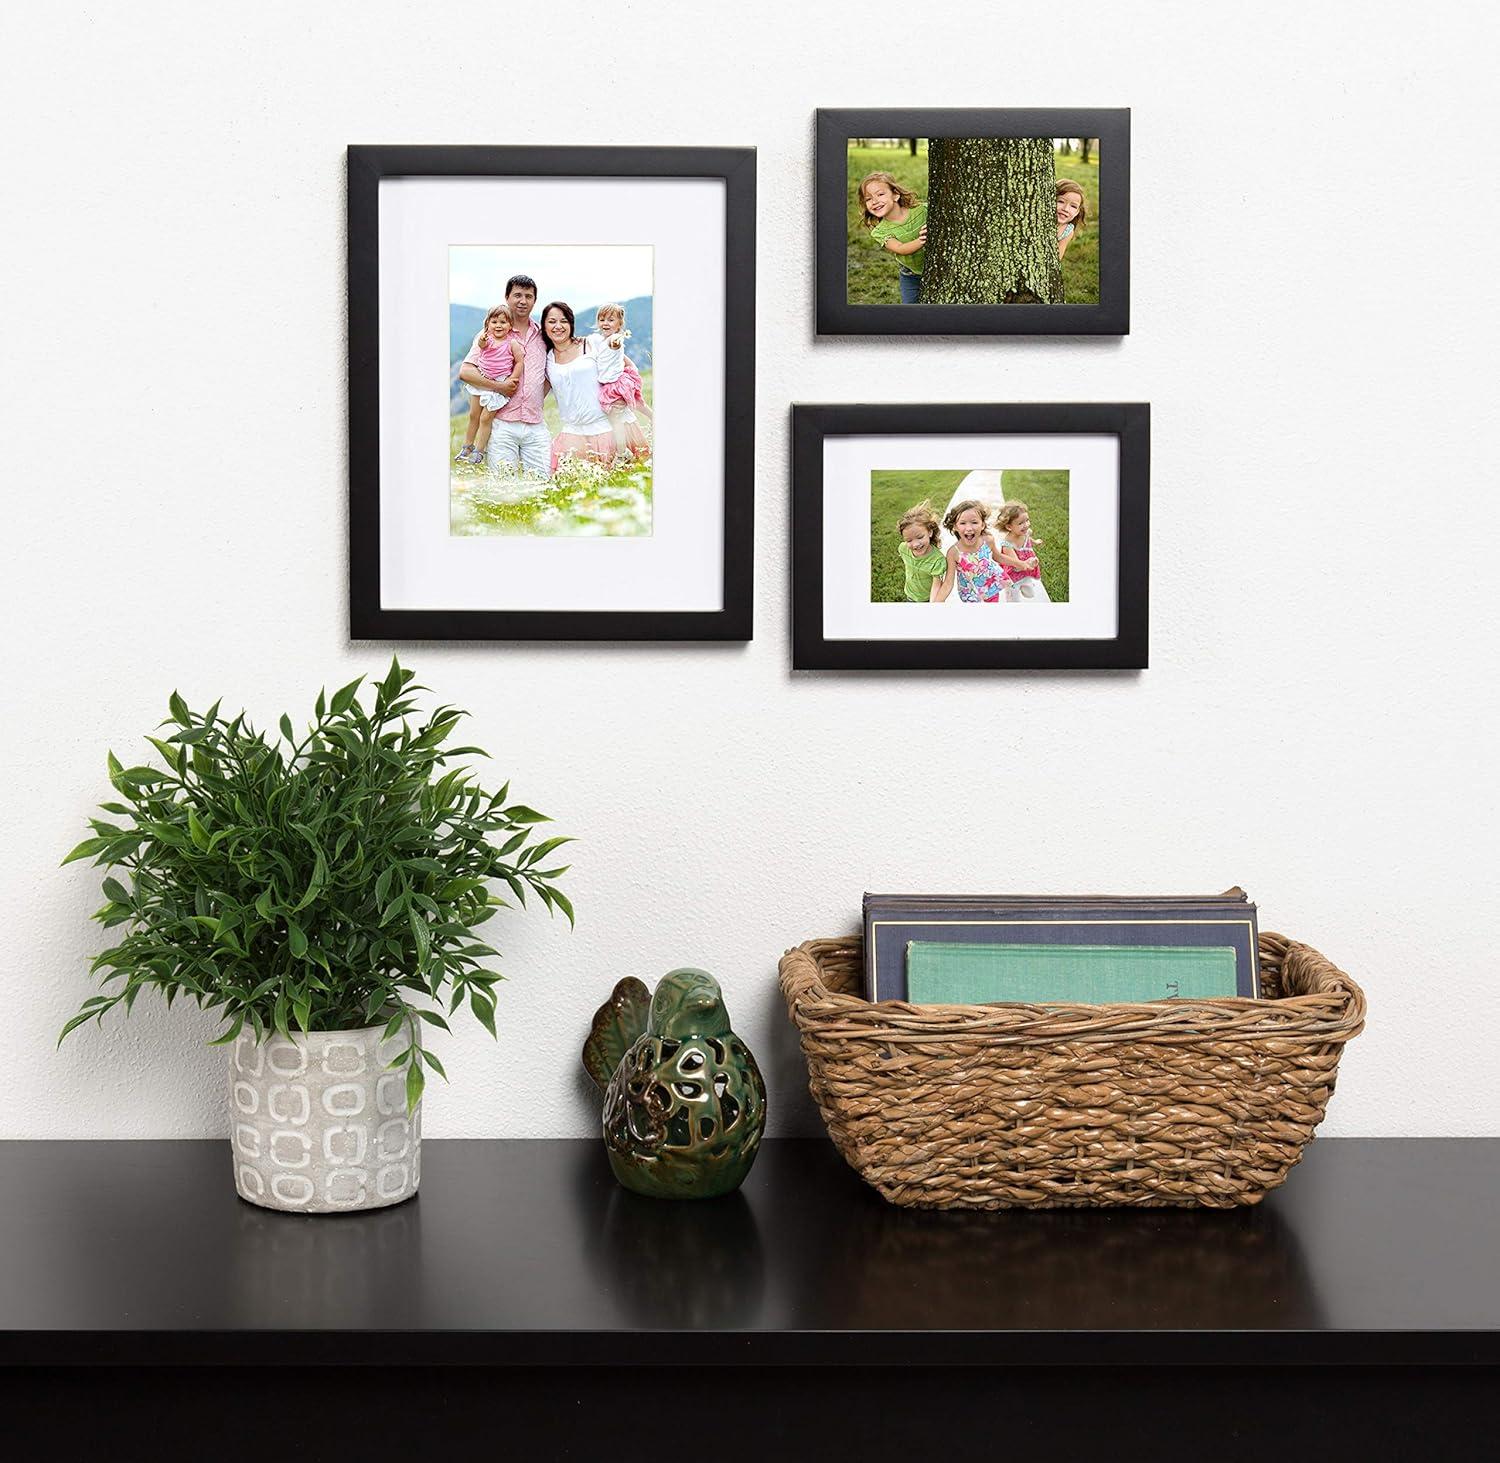 Classic Black Wood Gallery Frame Set for 8x10 or 5x7 Photos, Pack of 4